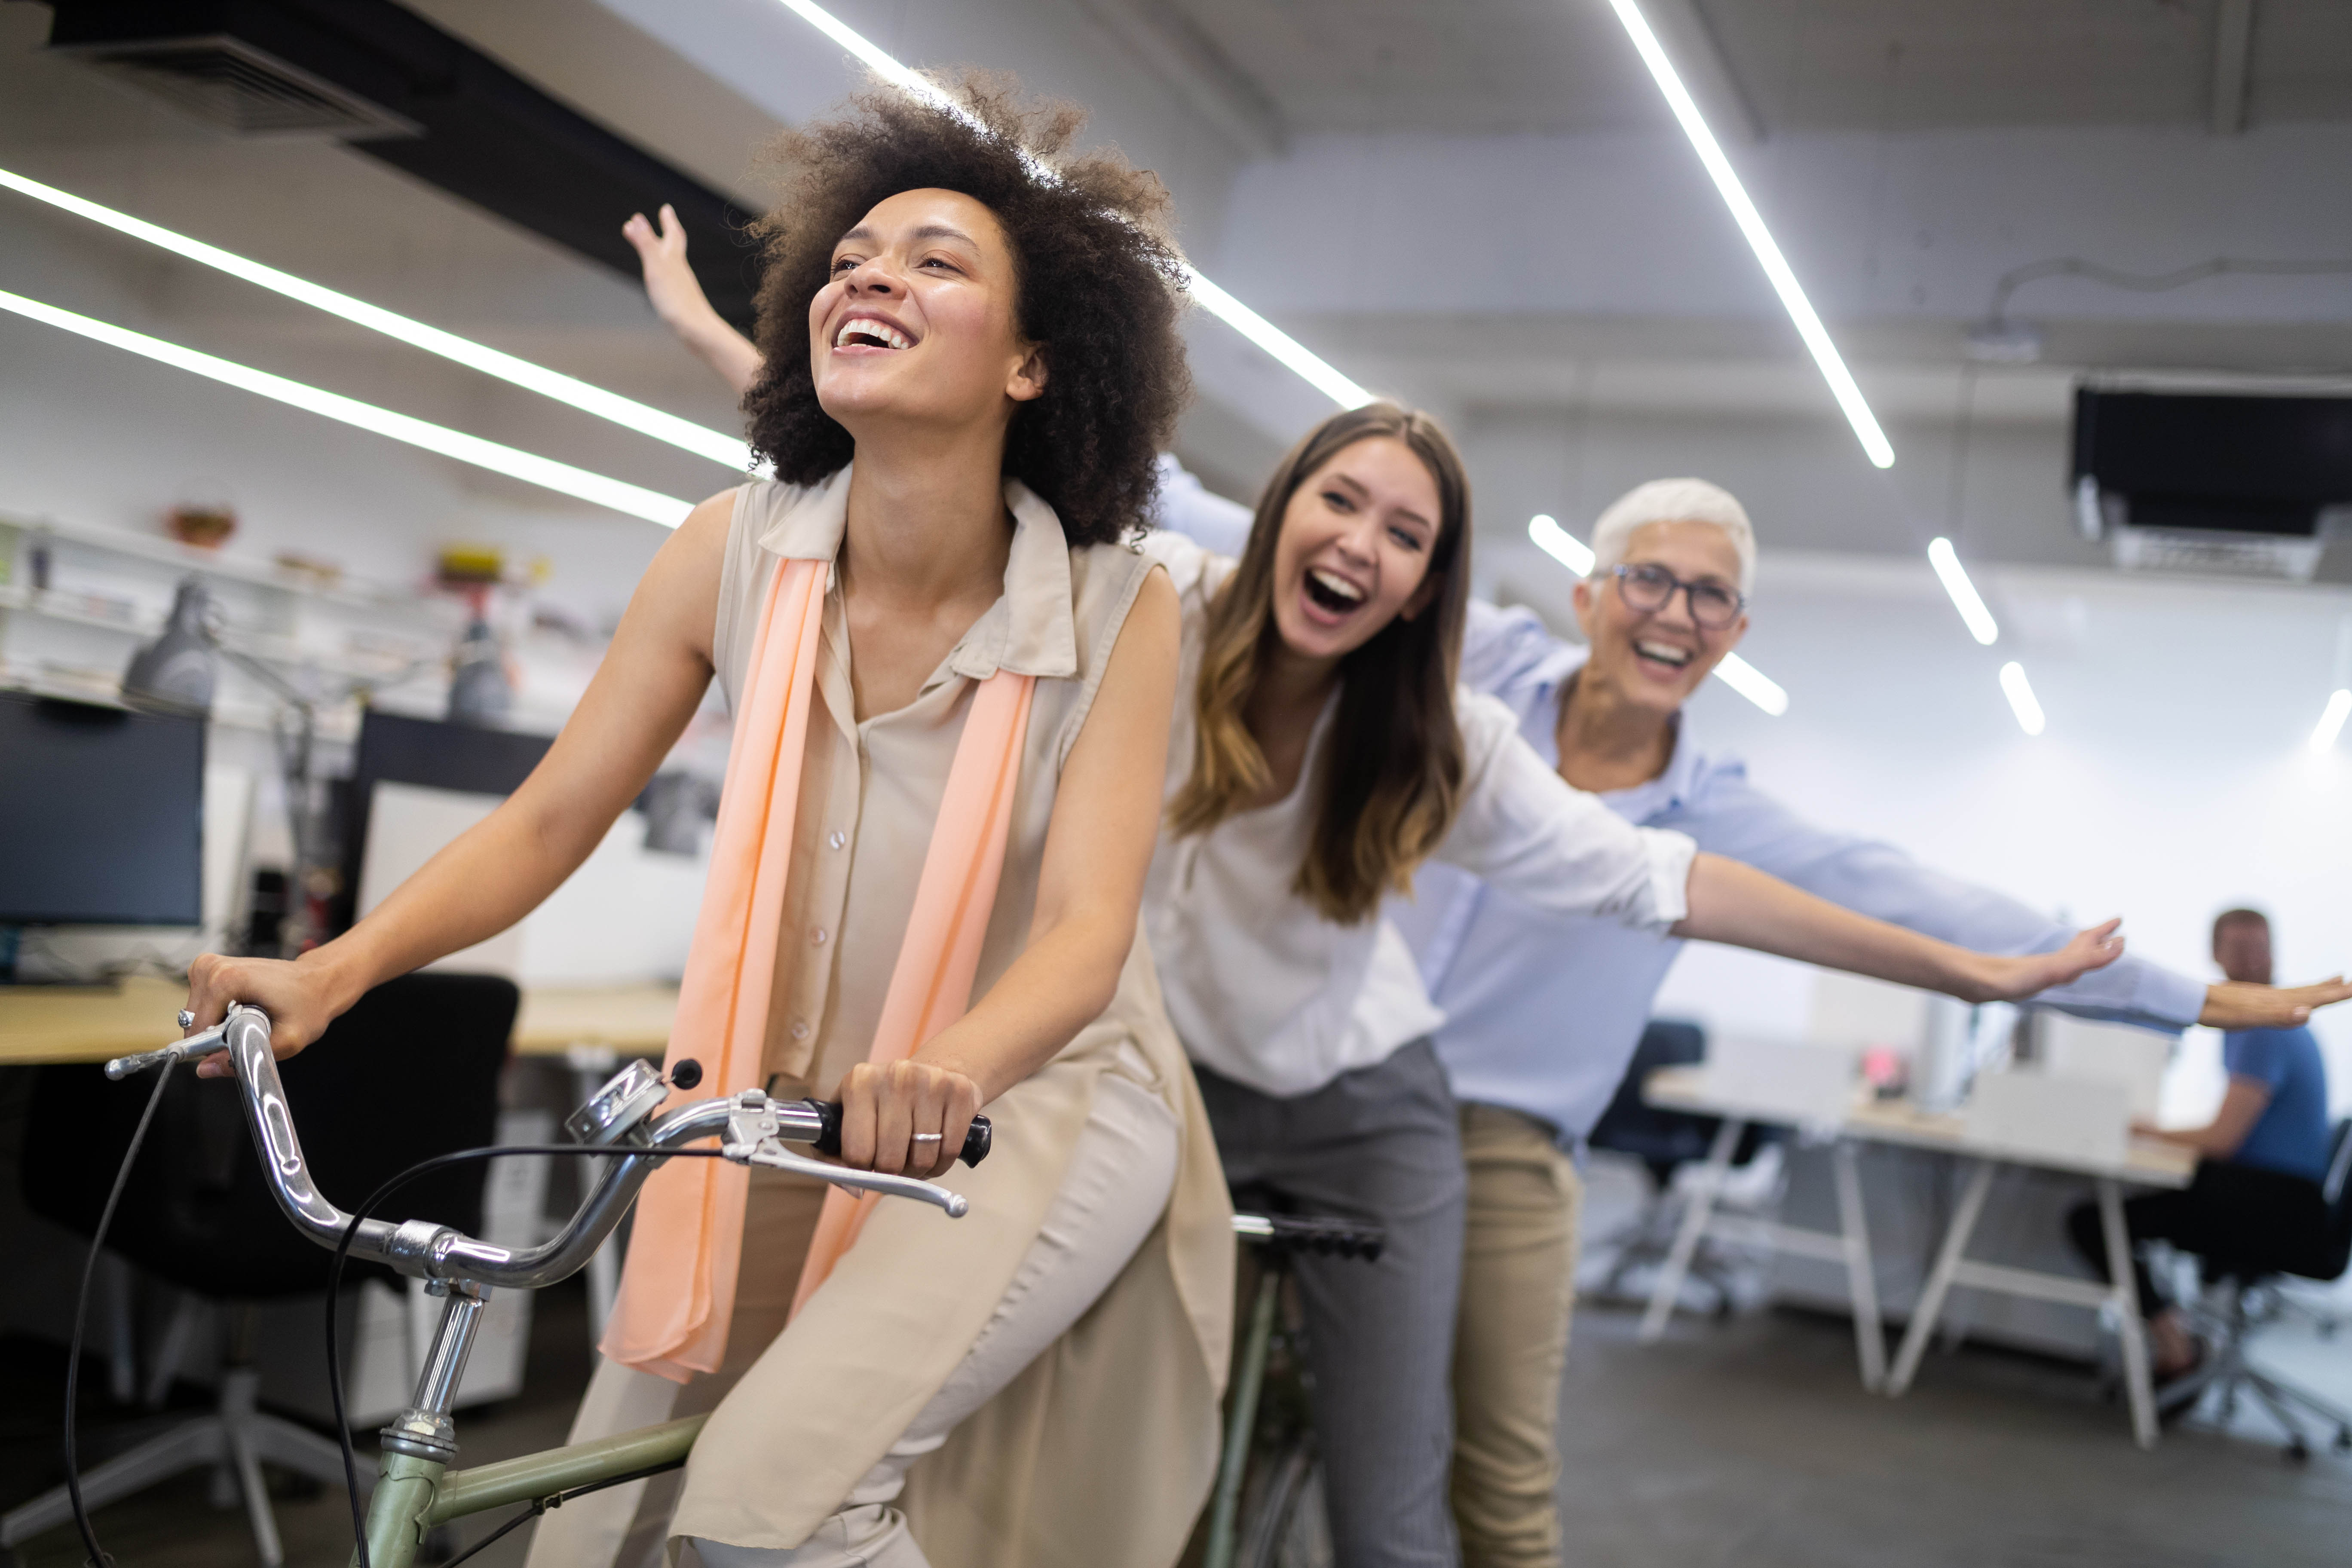 3 women of various ages riding a bike and laughing through the office, the two women on the back of the bike have their arms wide like they are flying